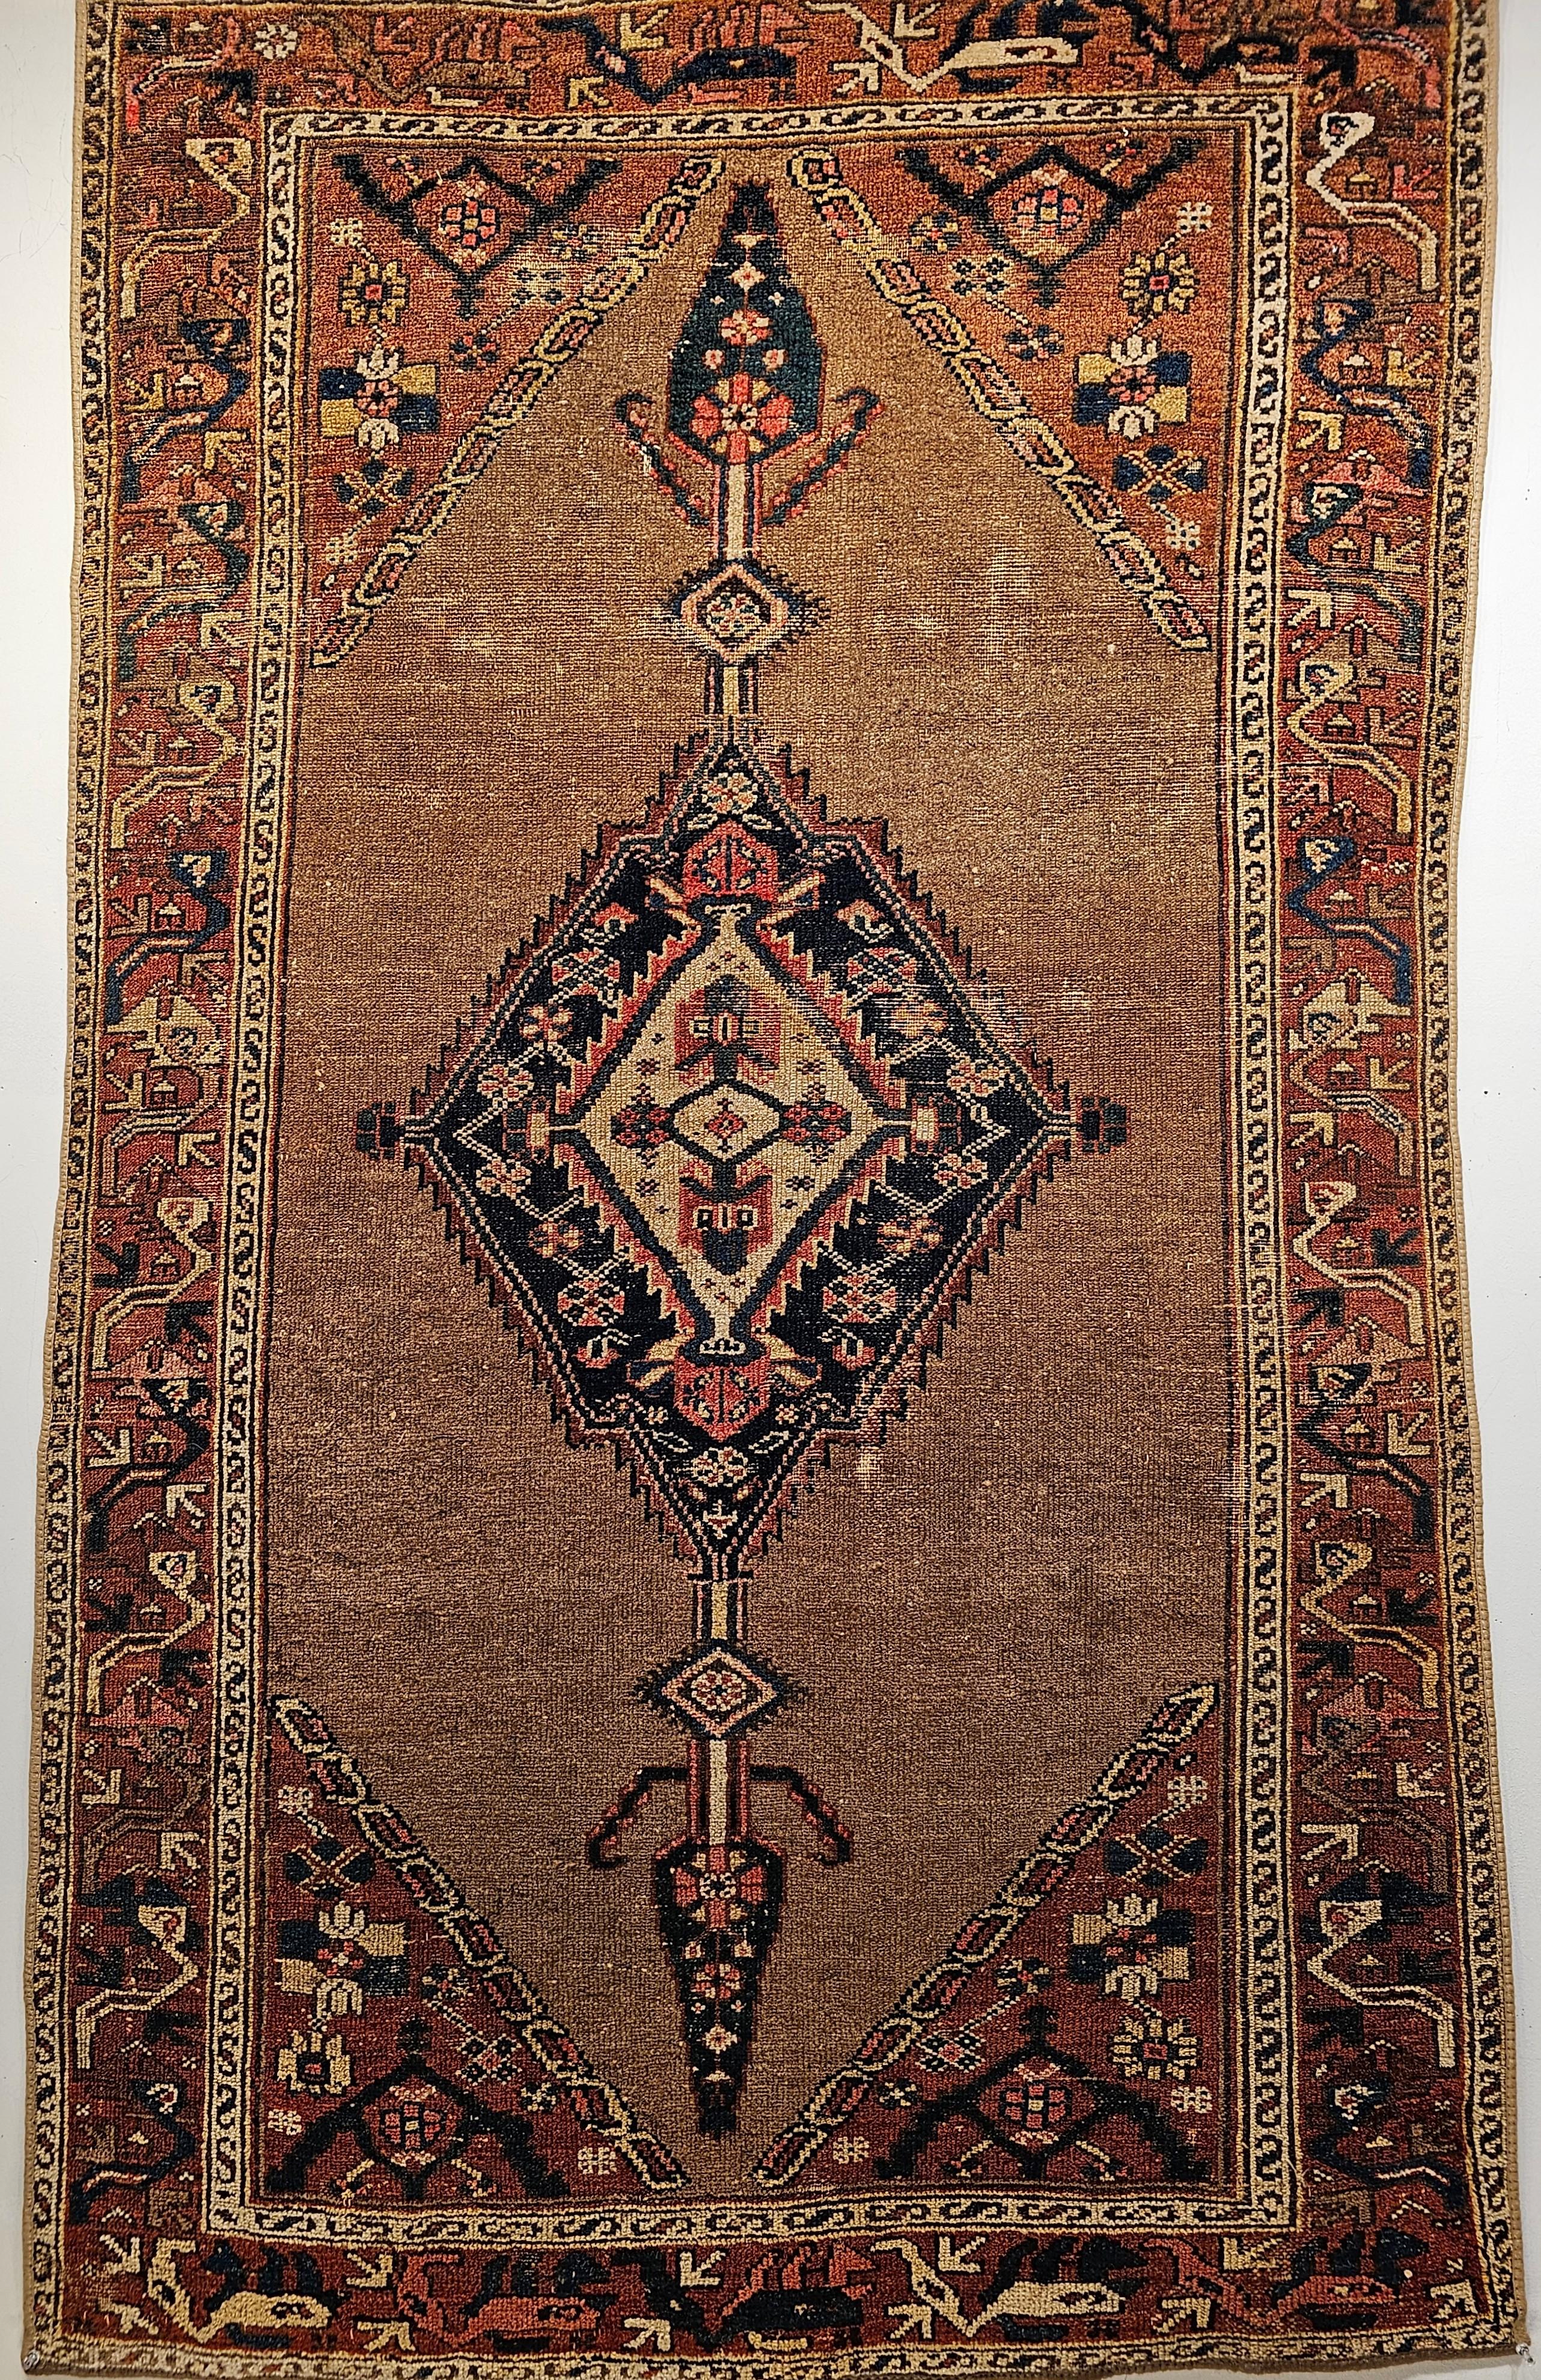 Vintage Persian Camelhair Malayer Area Rug with a central medallion in a geometric pattern is from the early 1900s.   The rug has an open field design with the elongated medallion in navy blue and ivory colors set on a camelhair background.  The